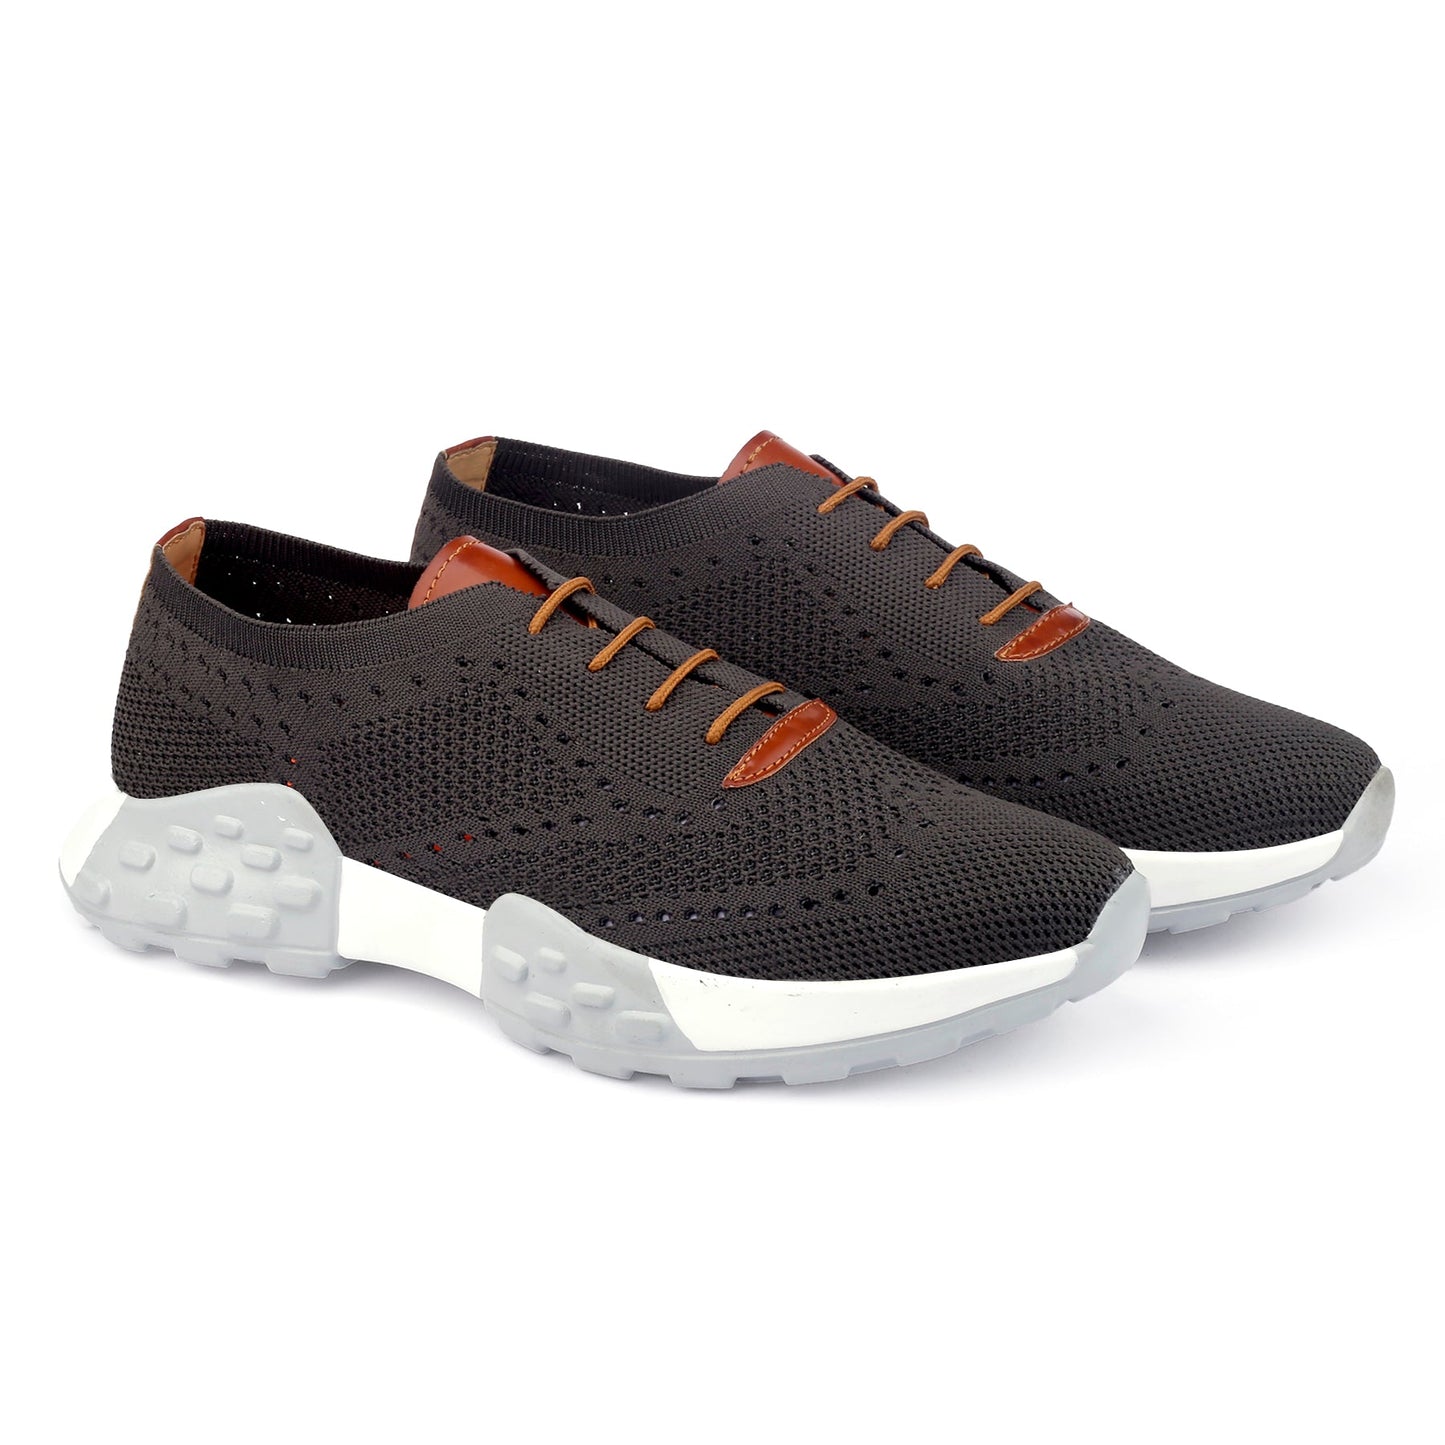 Men's Latest Knitted Casual Sports Lace-Up Shoes